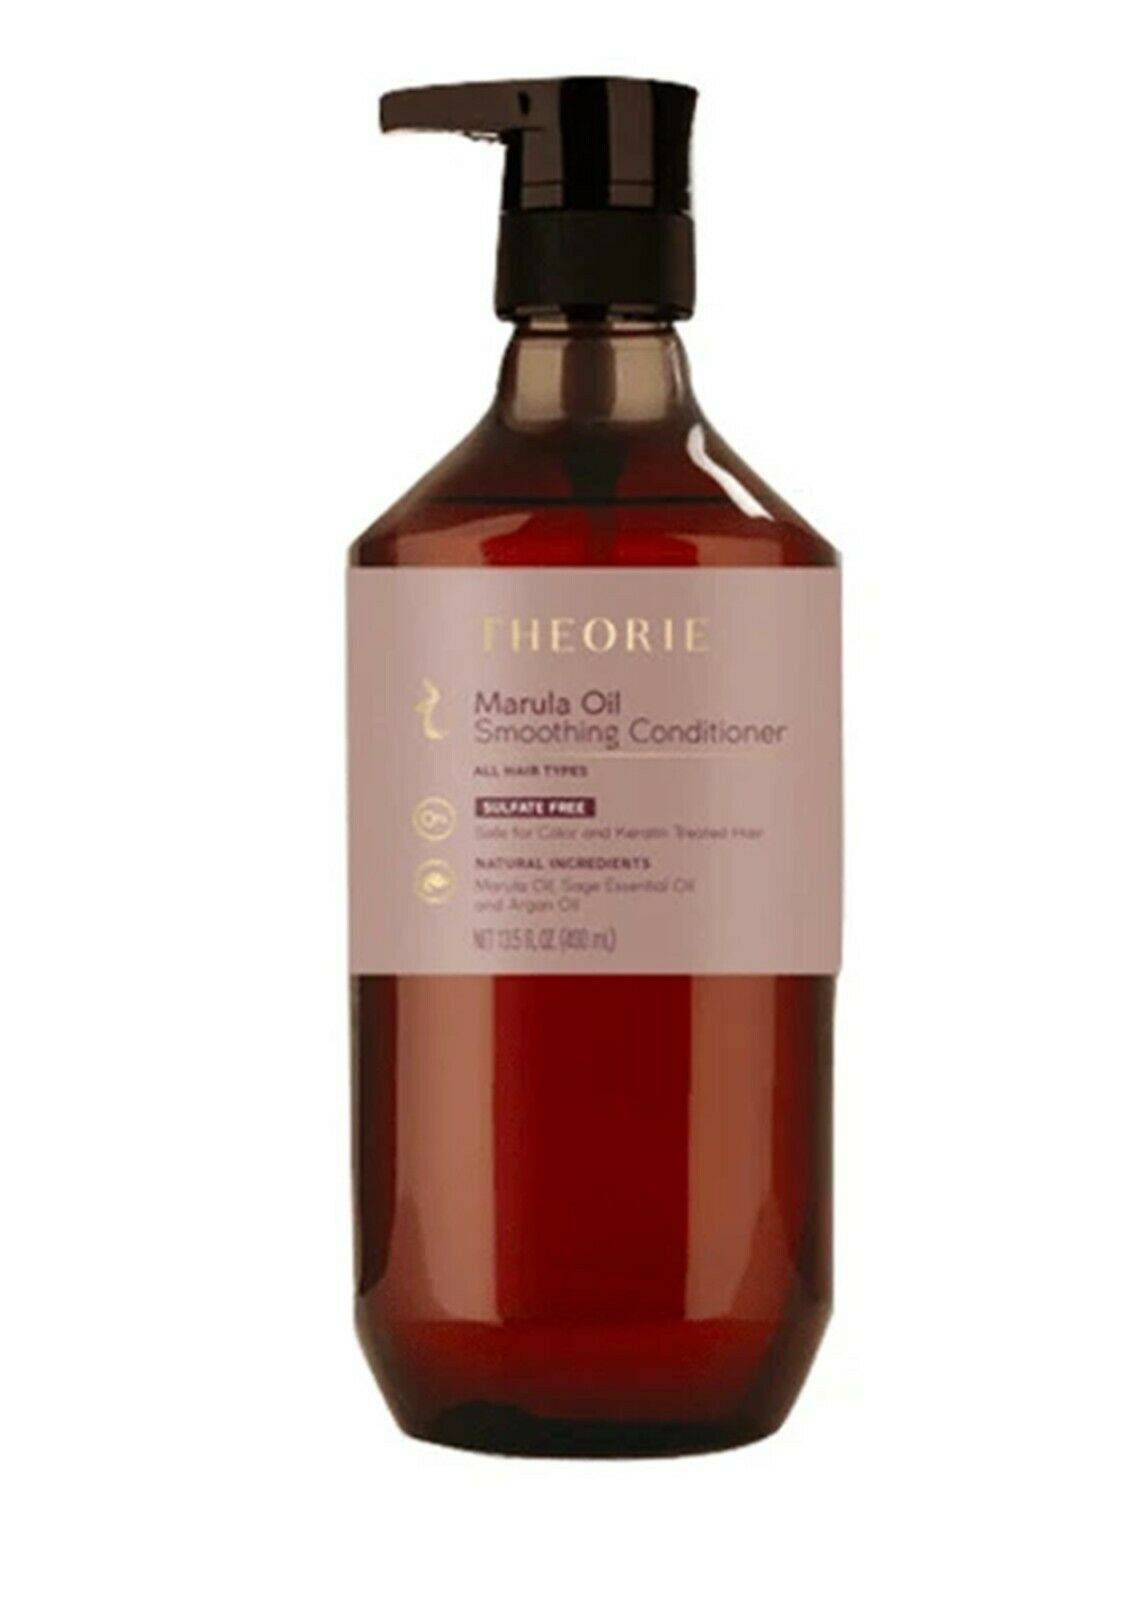 Theorie Marula Oil Smoothing Conditioner 800mL Sulfate Free - On Line Hair Depot